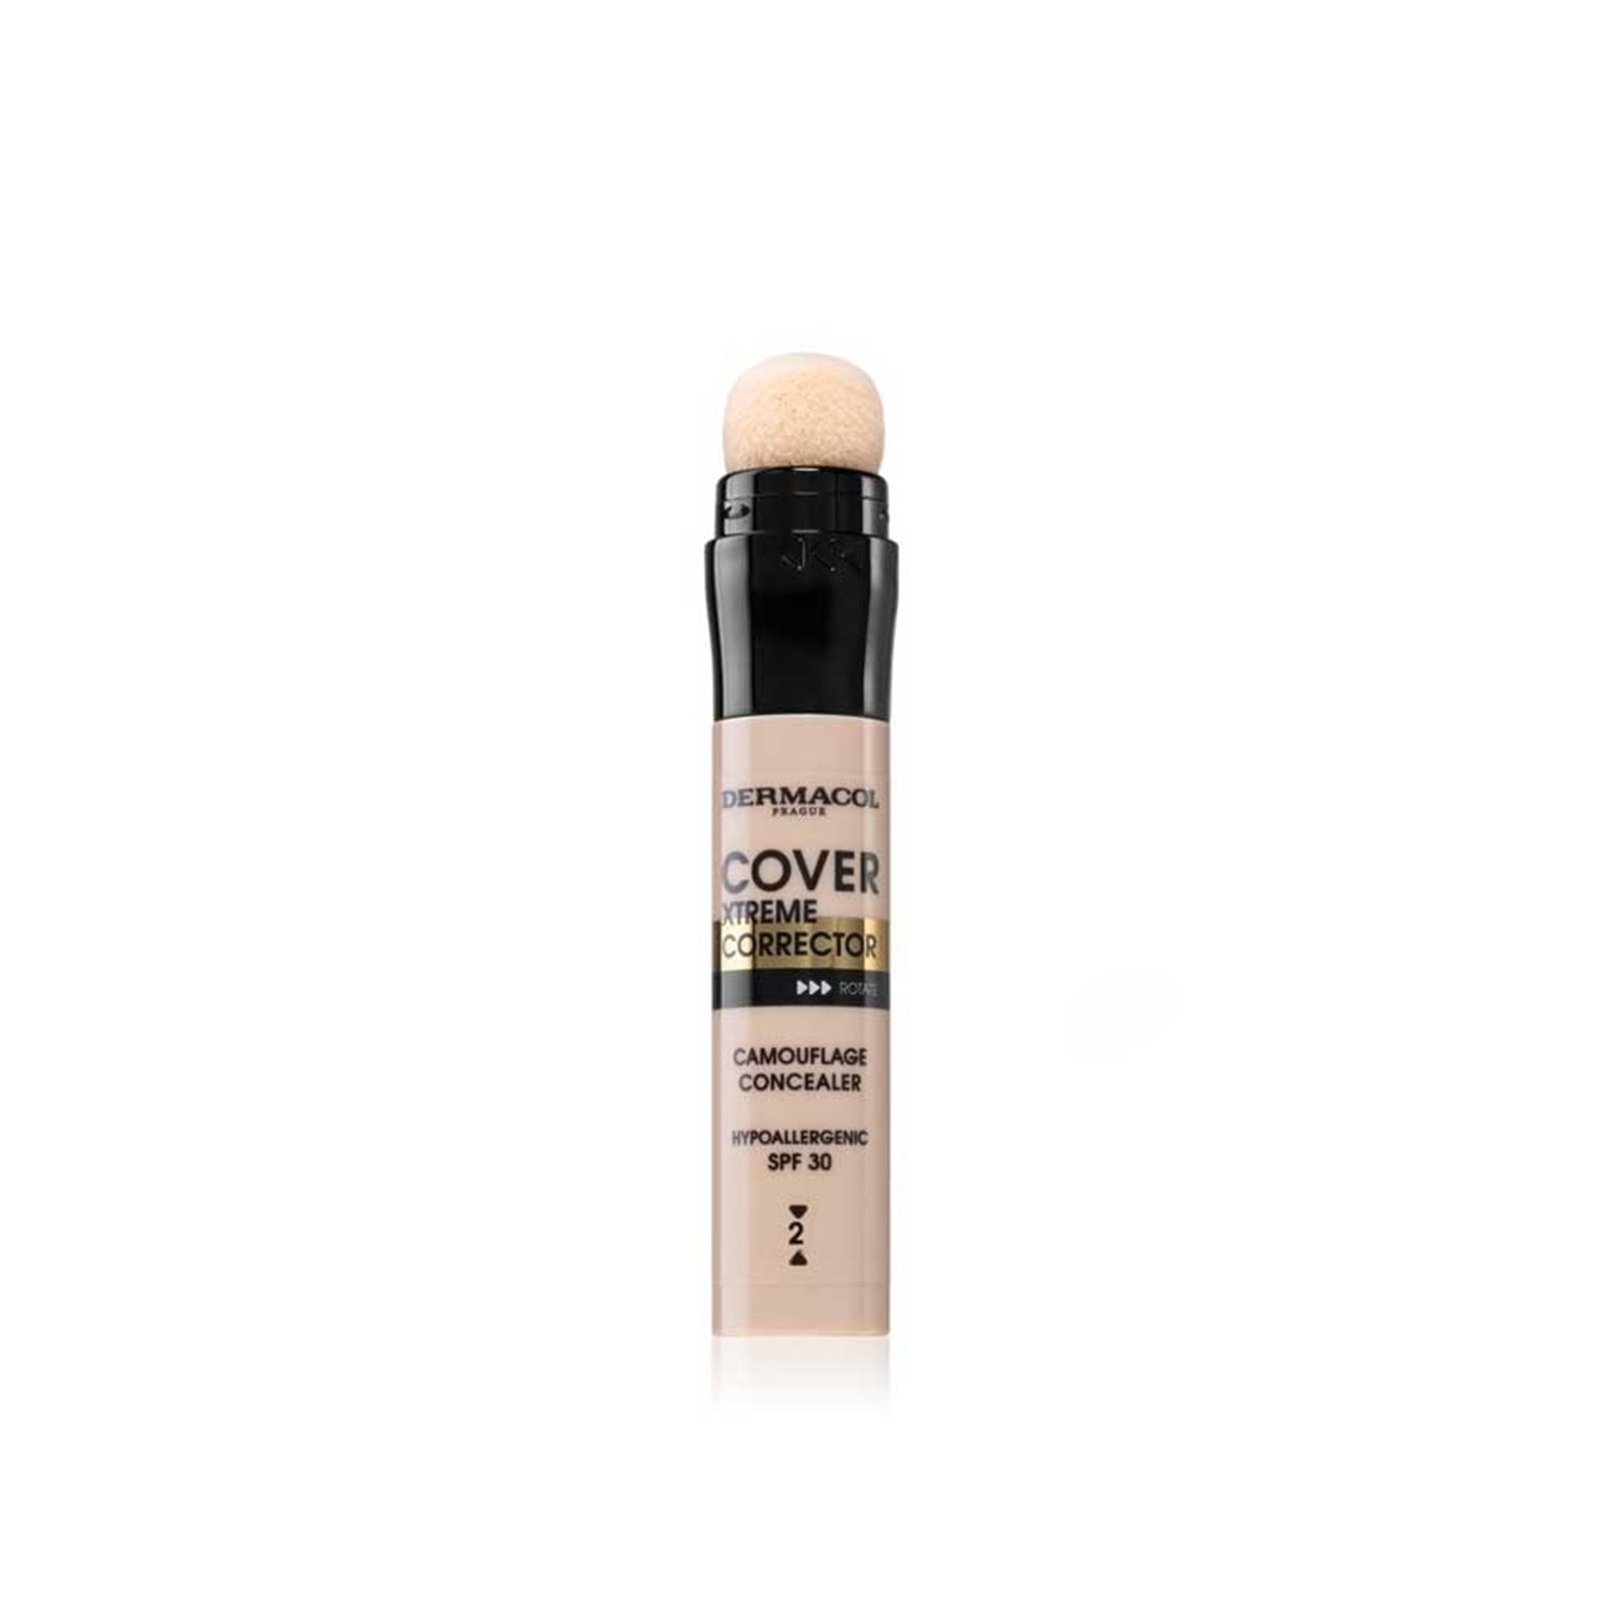 Dermacol Cover Xtreme Corrector 2 SPF30 8g